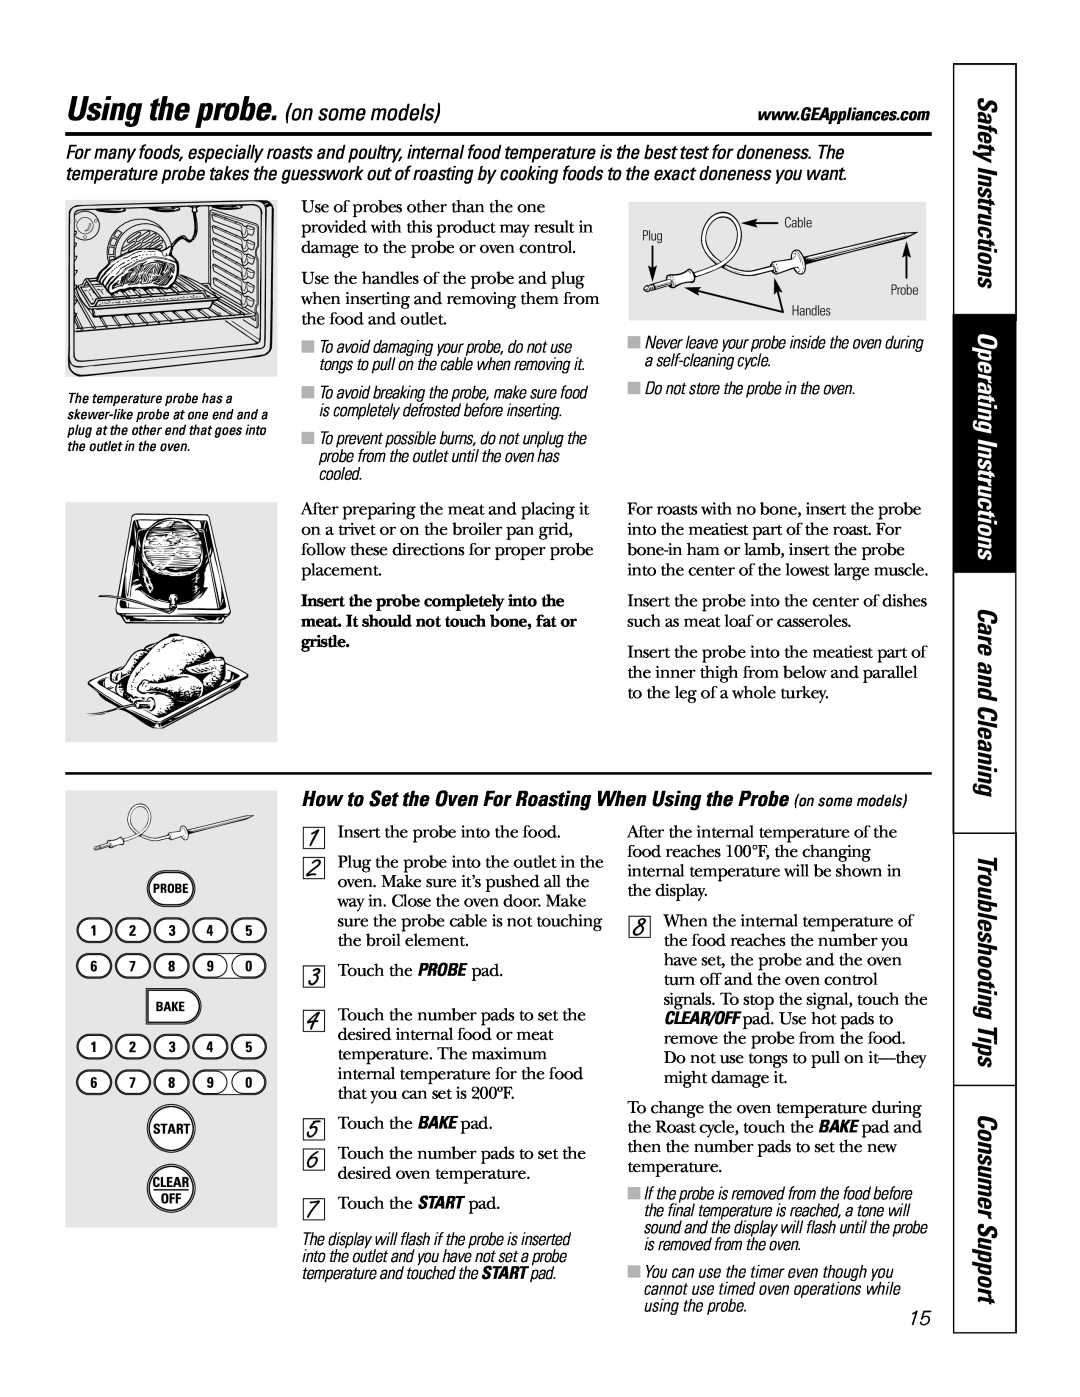 GE JSP57 owner manual Using the probe. on some models, Troubleshooting Tips Consumer Support, Care and Cleaning, Safety 